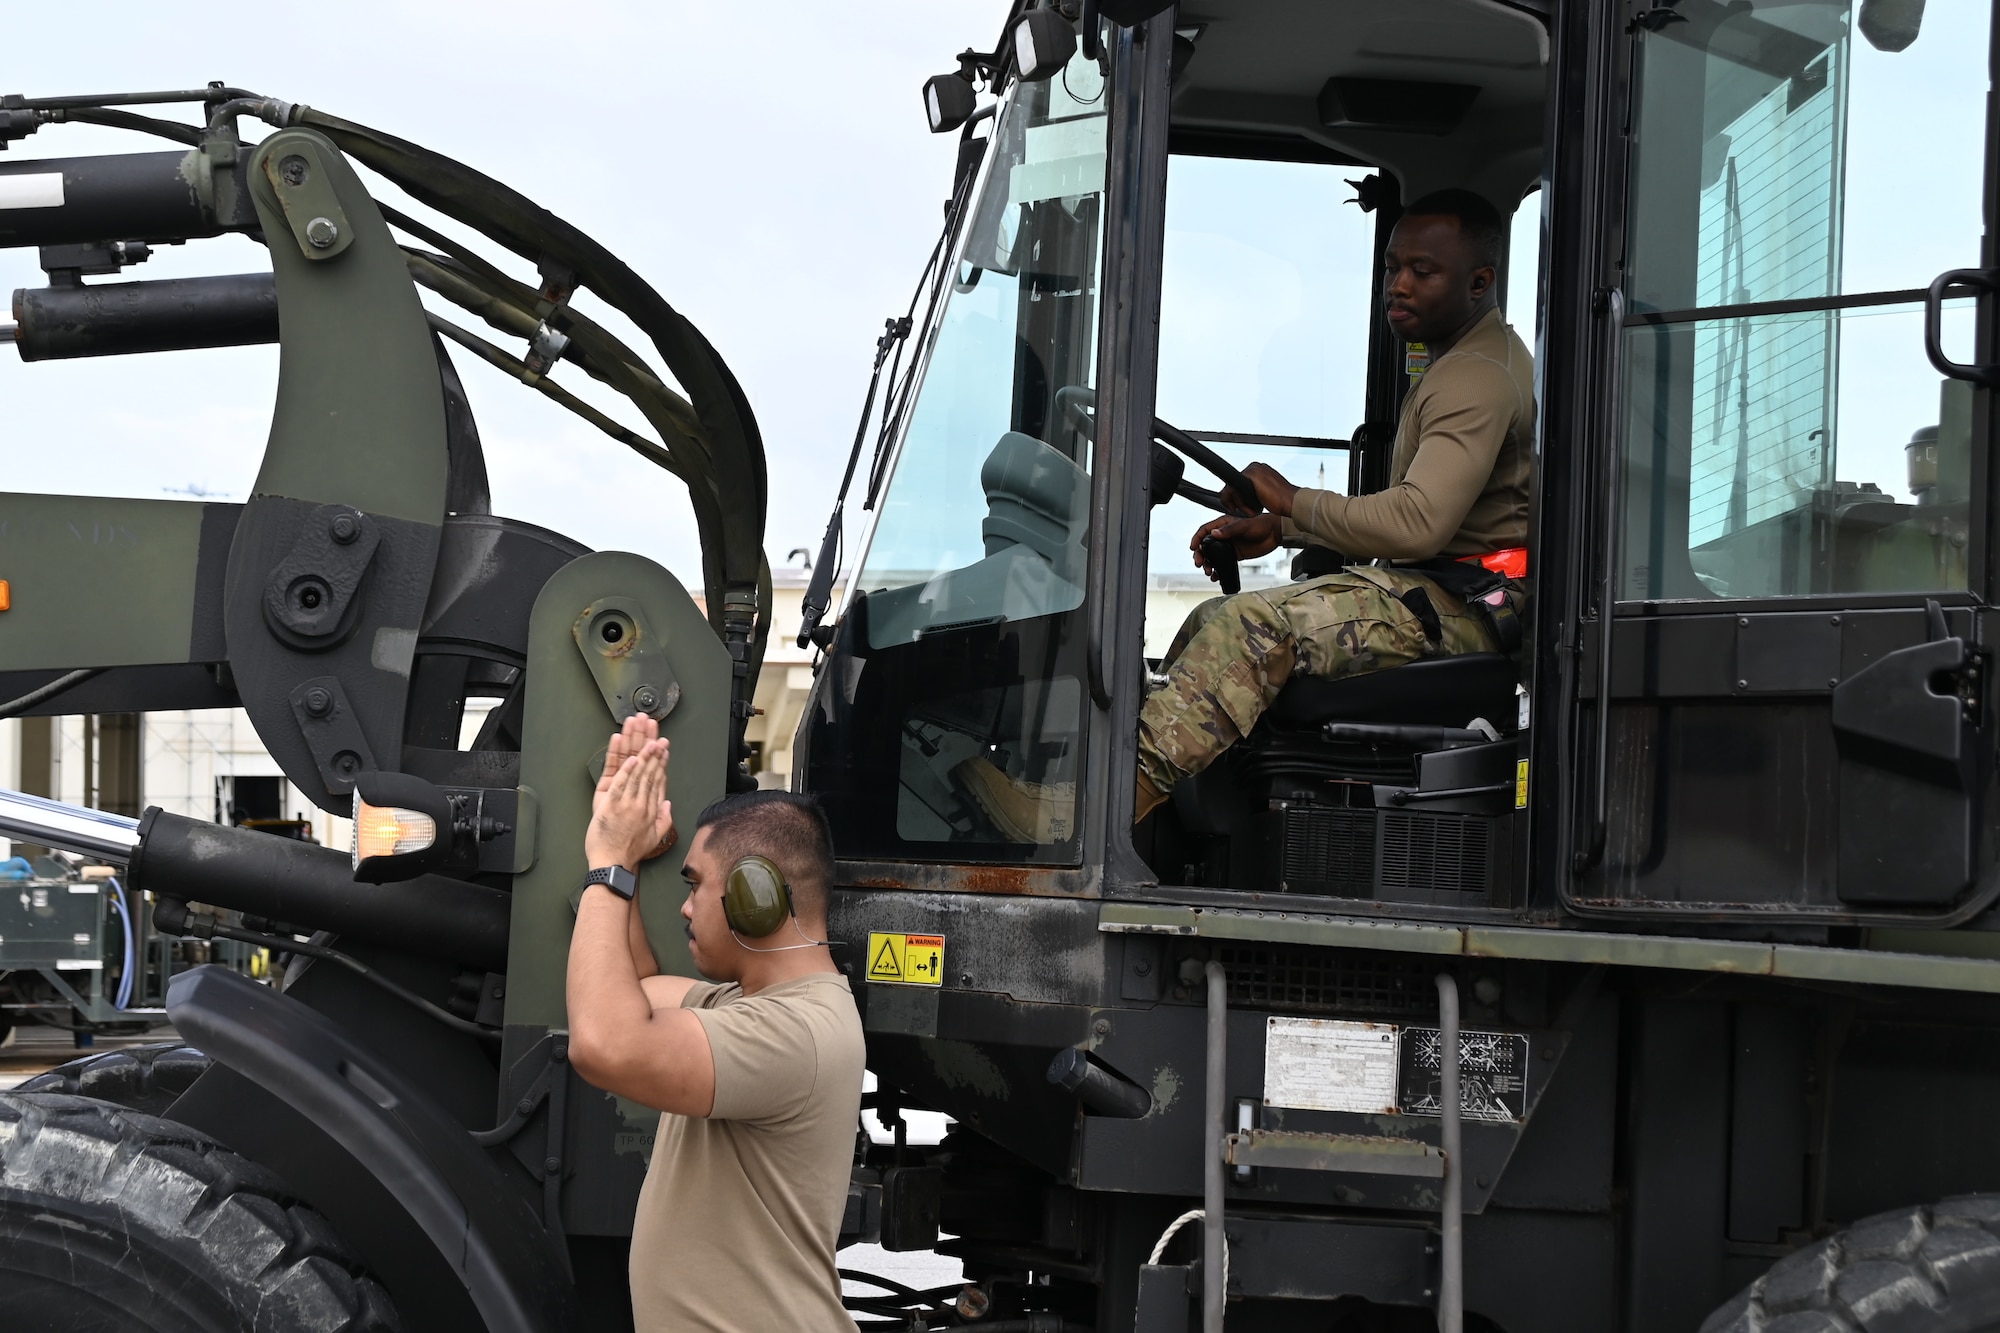 An airman gives ground guidance with his hands up to the driver of a forklift.